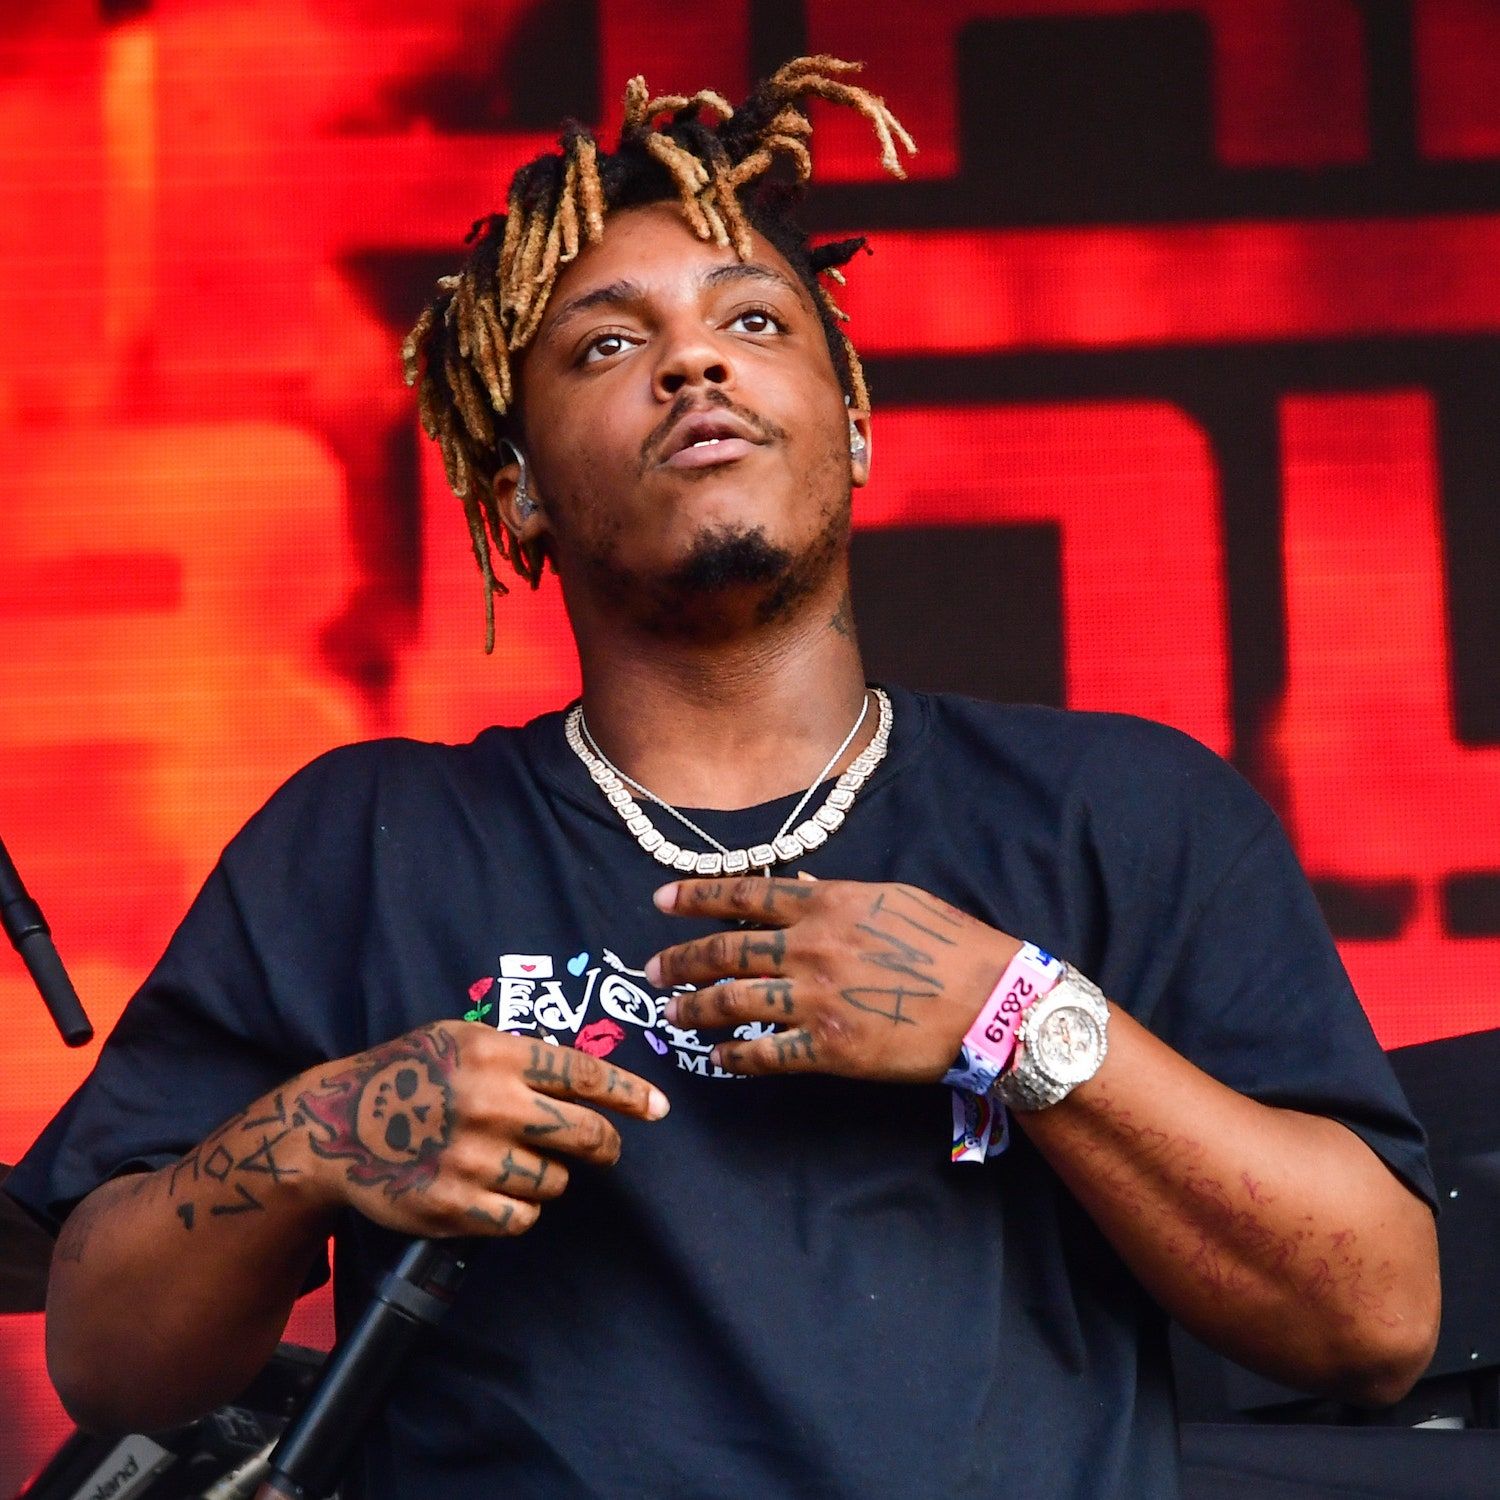 Remembering Juice WRLD, a Young Rapper Who Was Only Getting Started